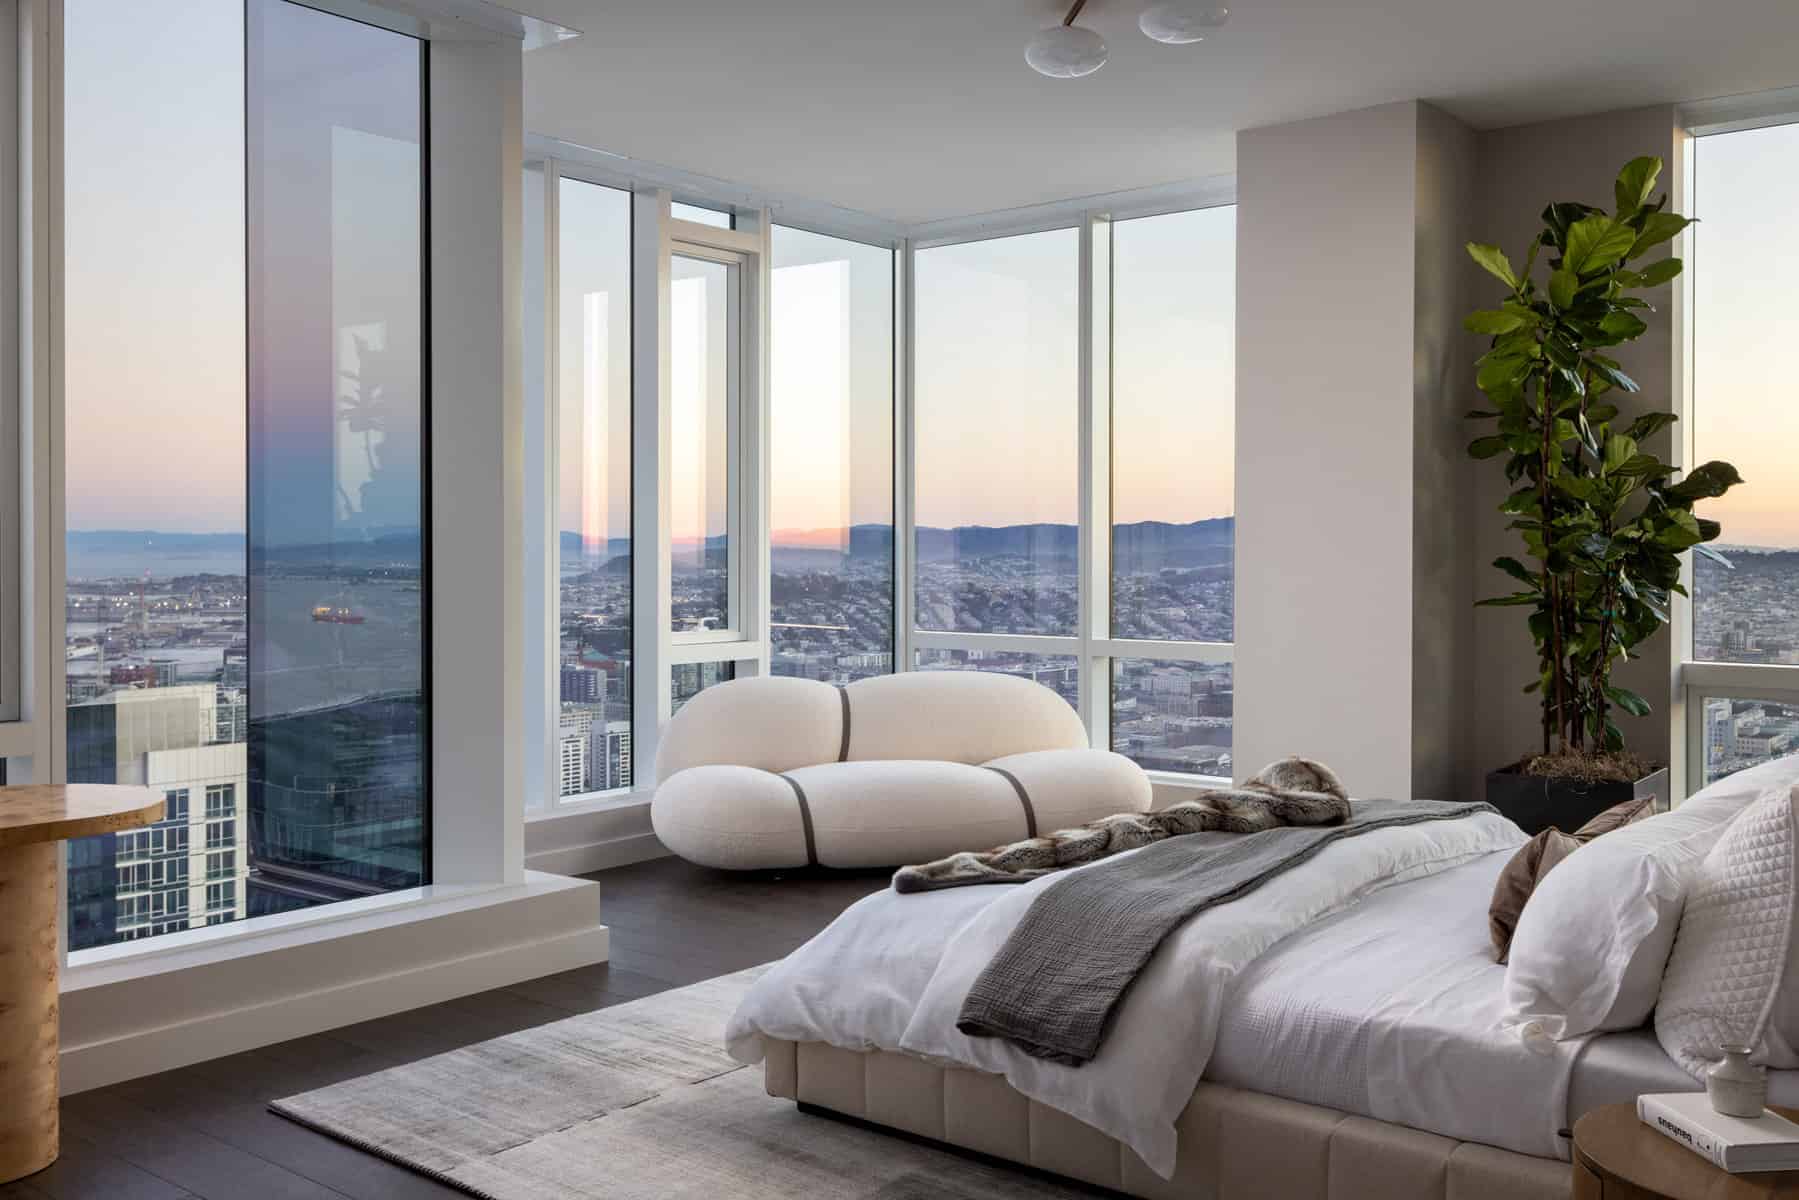 Condo bedroom with tall clear glass windows that showcases a white interior and white furnishings